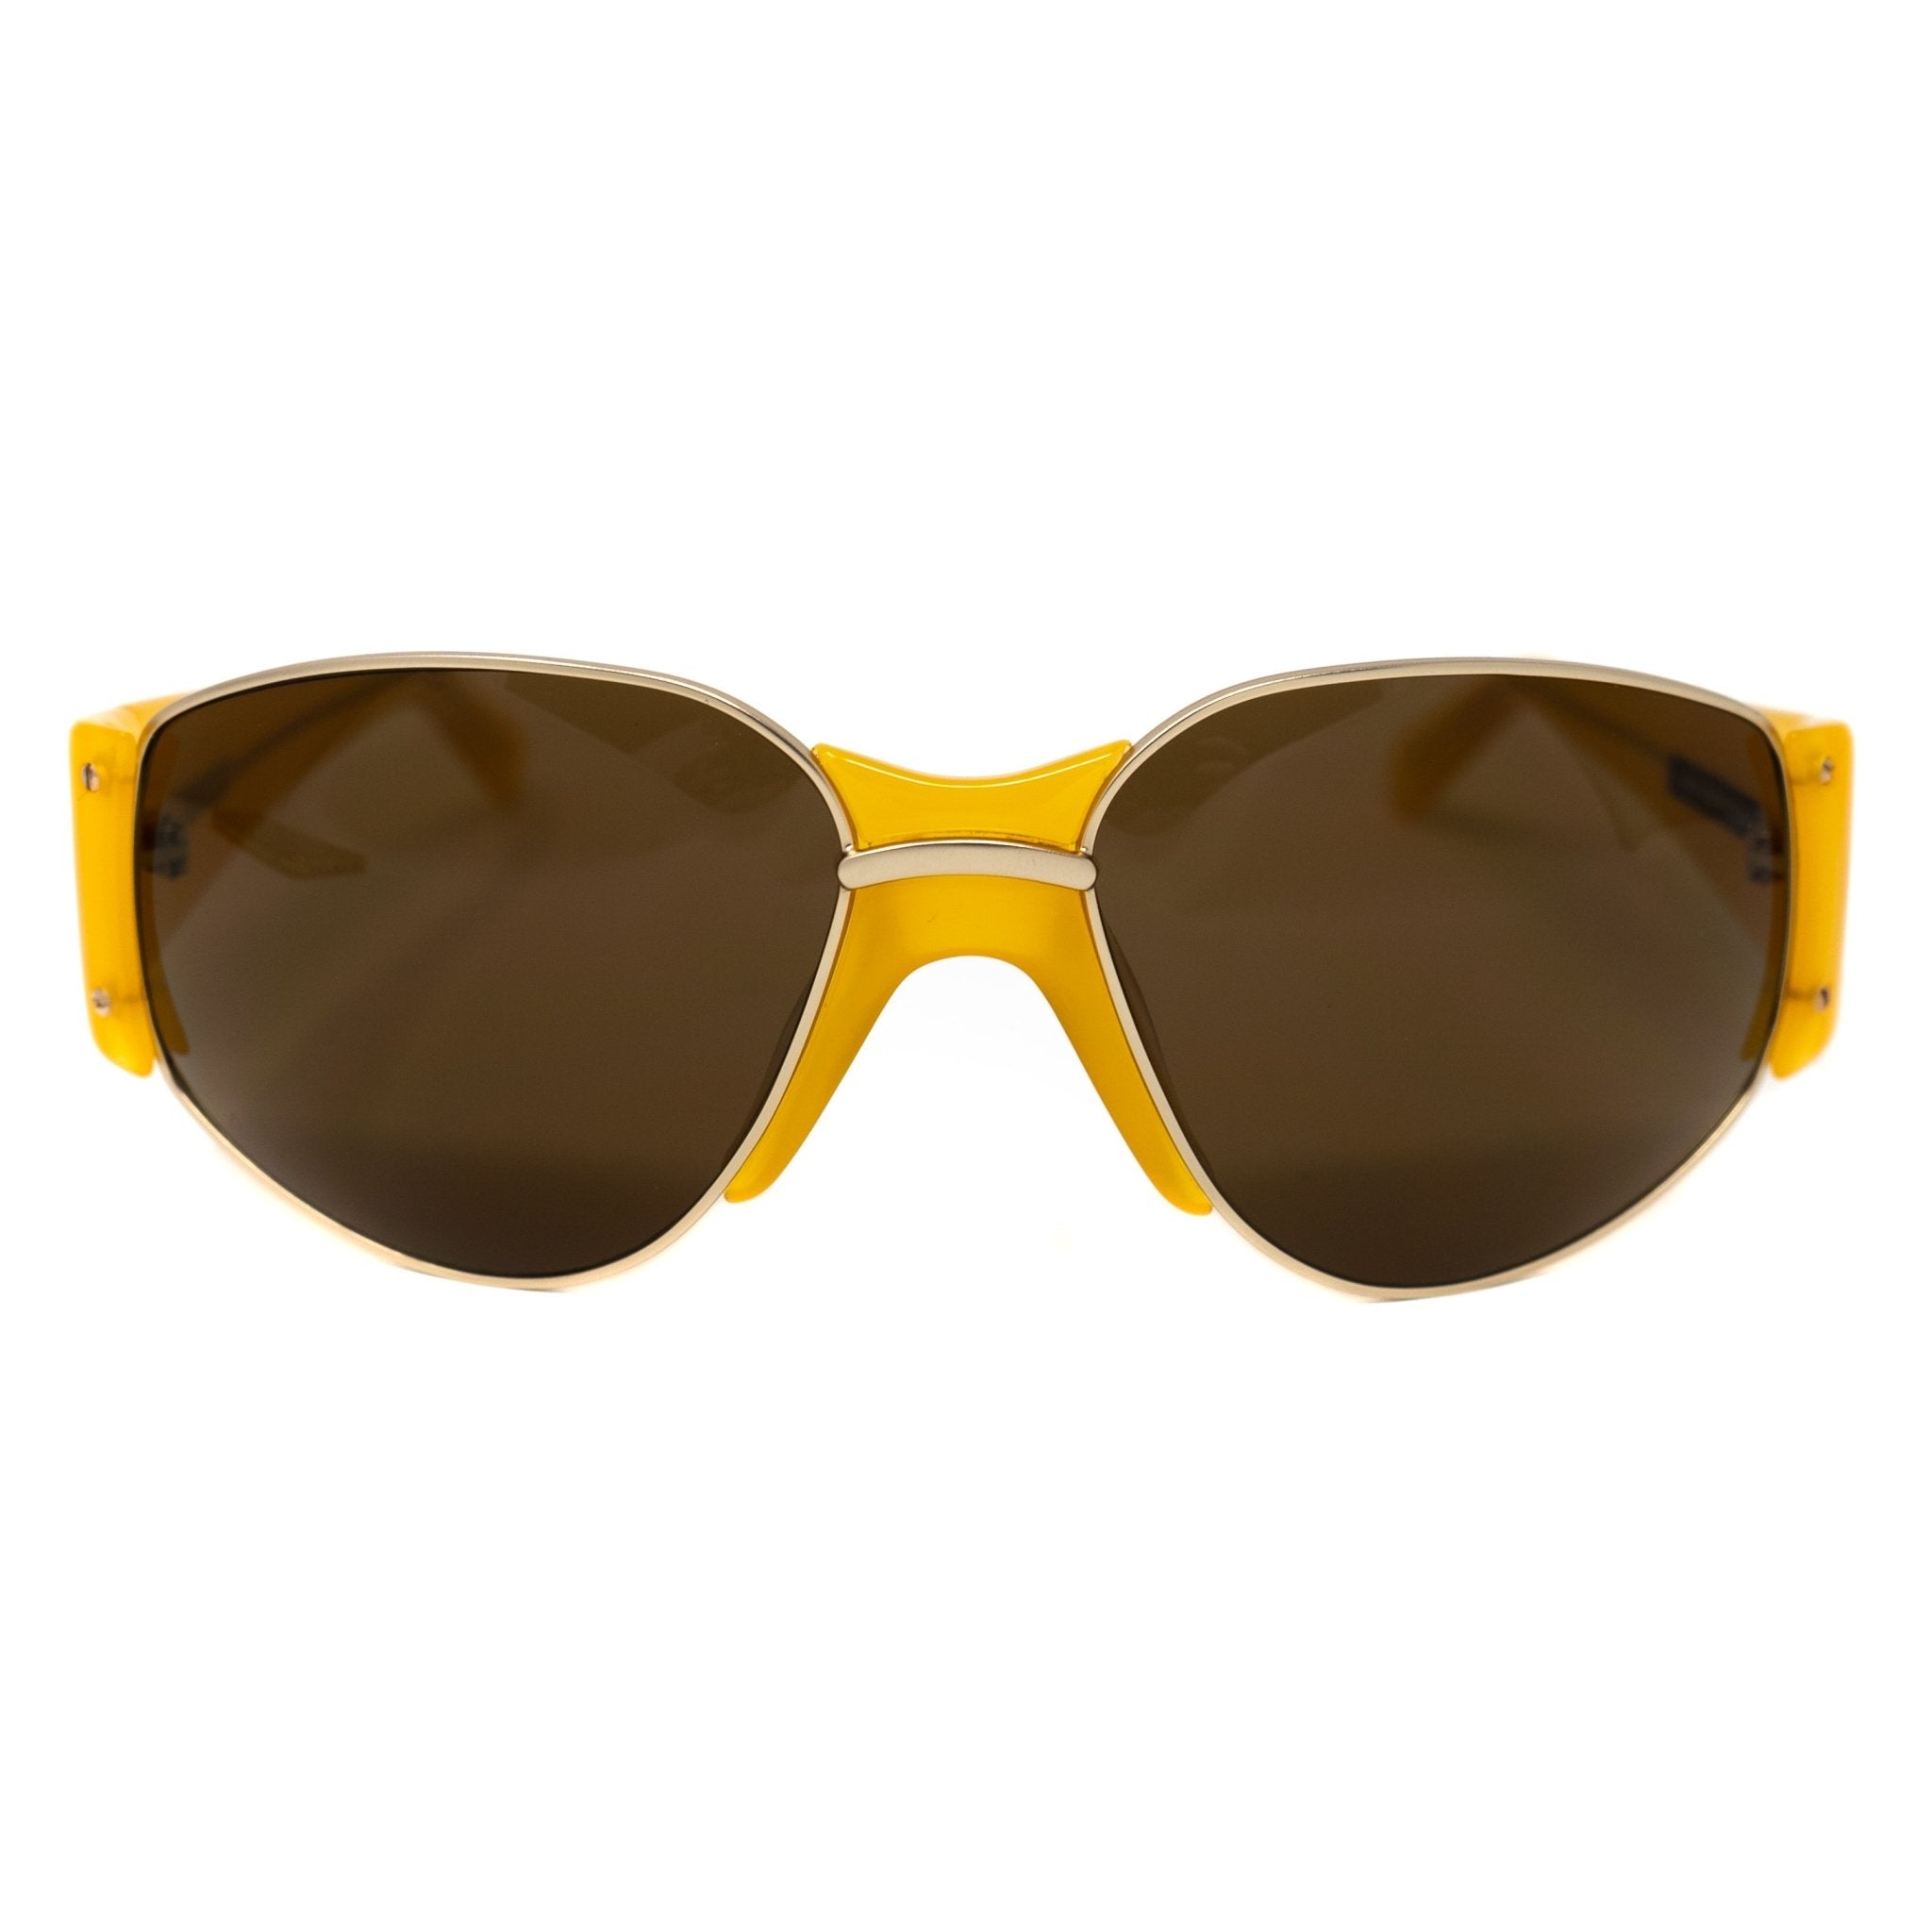 Eley Kishimoto Sunglasses Oversized Mustard Gold With Brown Lenses 5EKC1 - Watches & Crystals